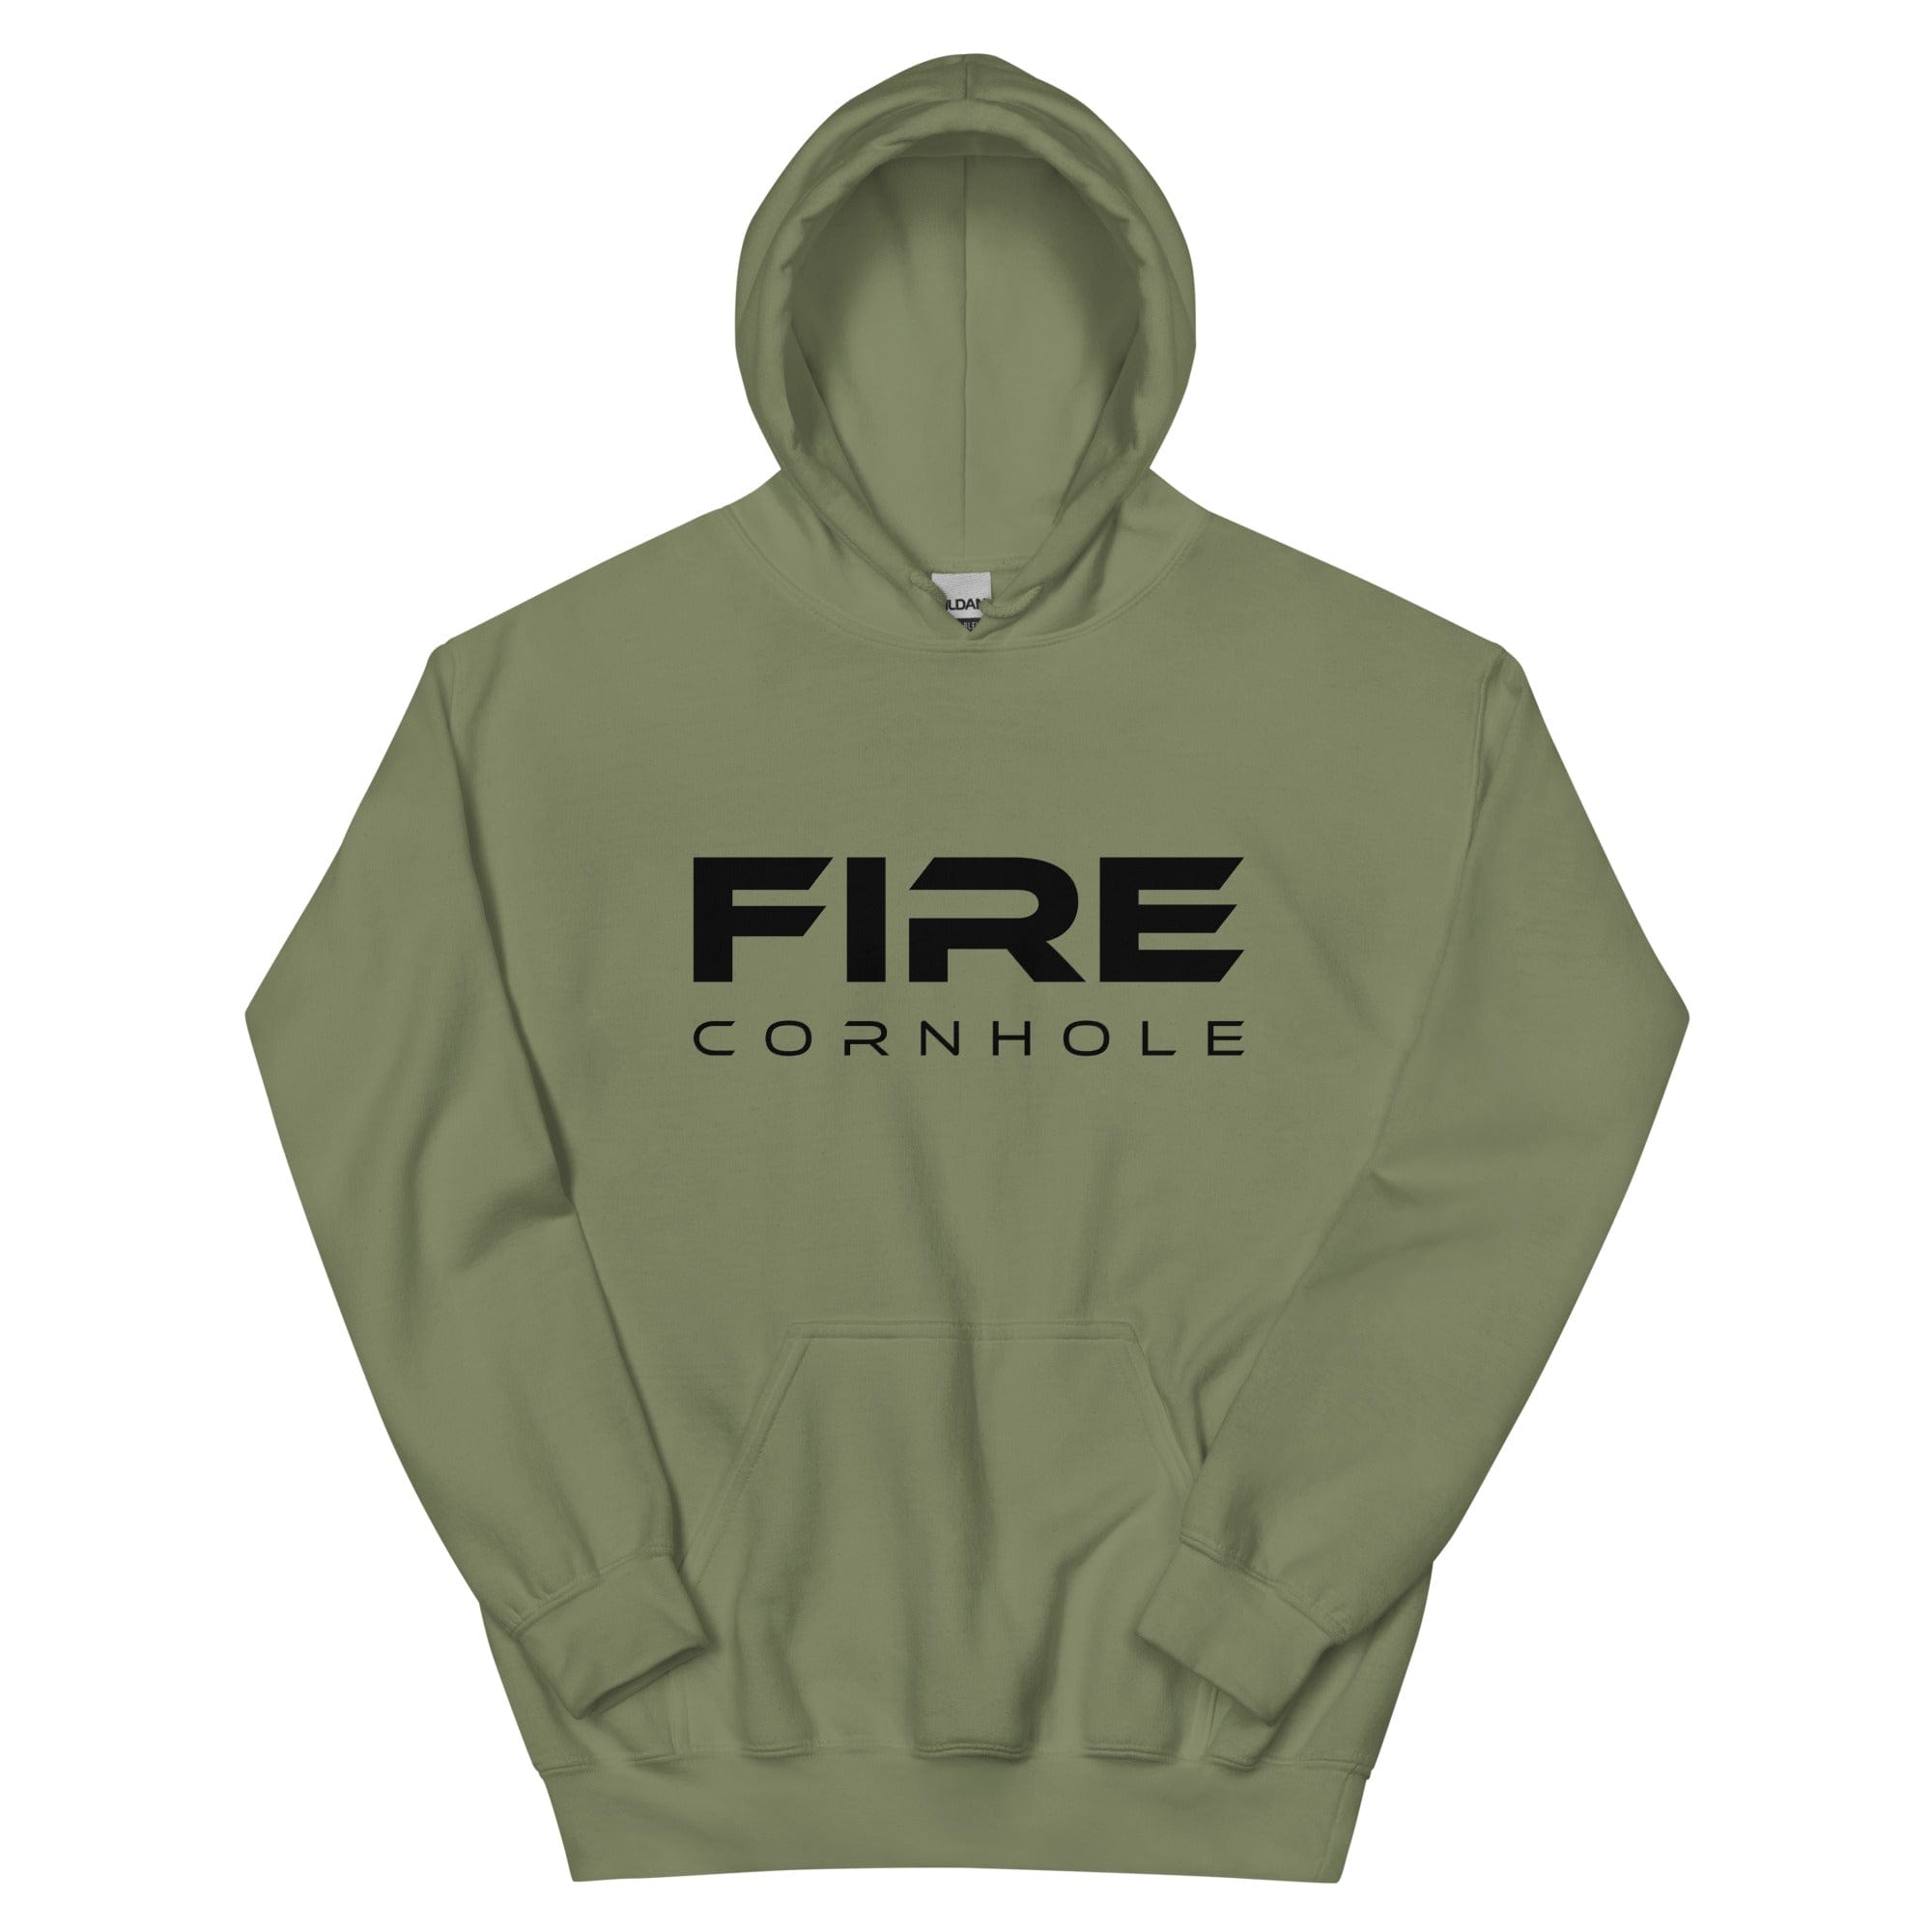 Forest green unisex cotton hoodie with Fire Cornhole logo in black